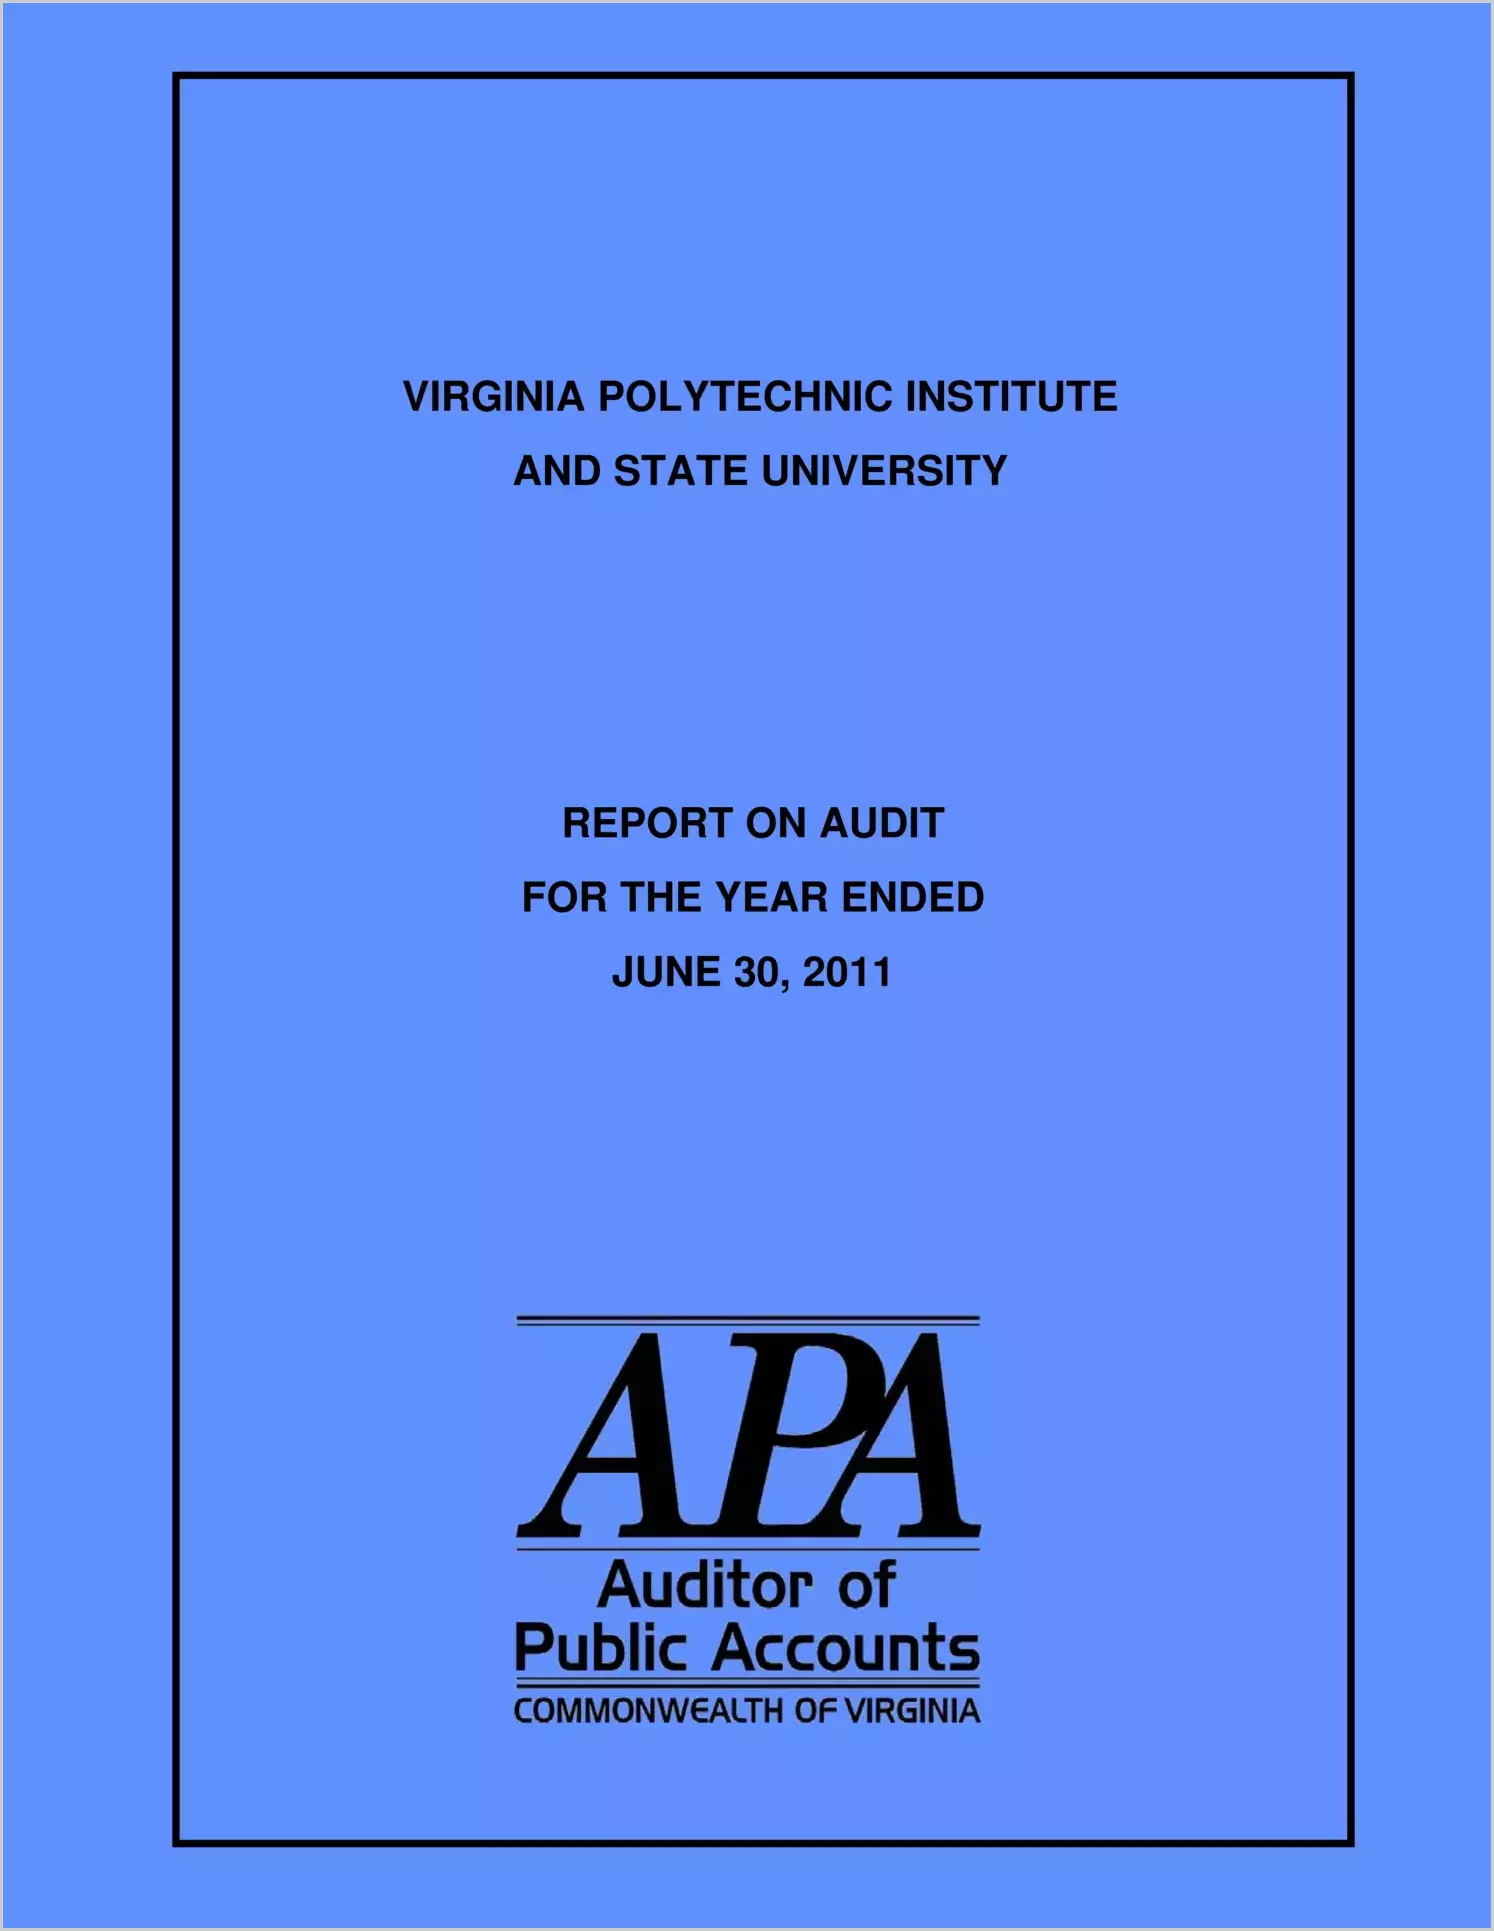 Virginia Polytechnic Institute and State University for the year ended June 30, 2011